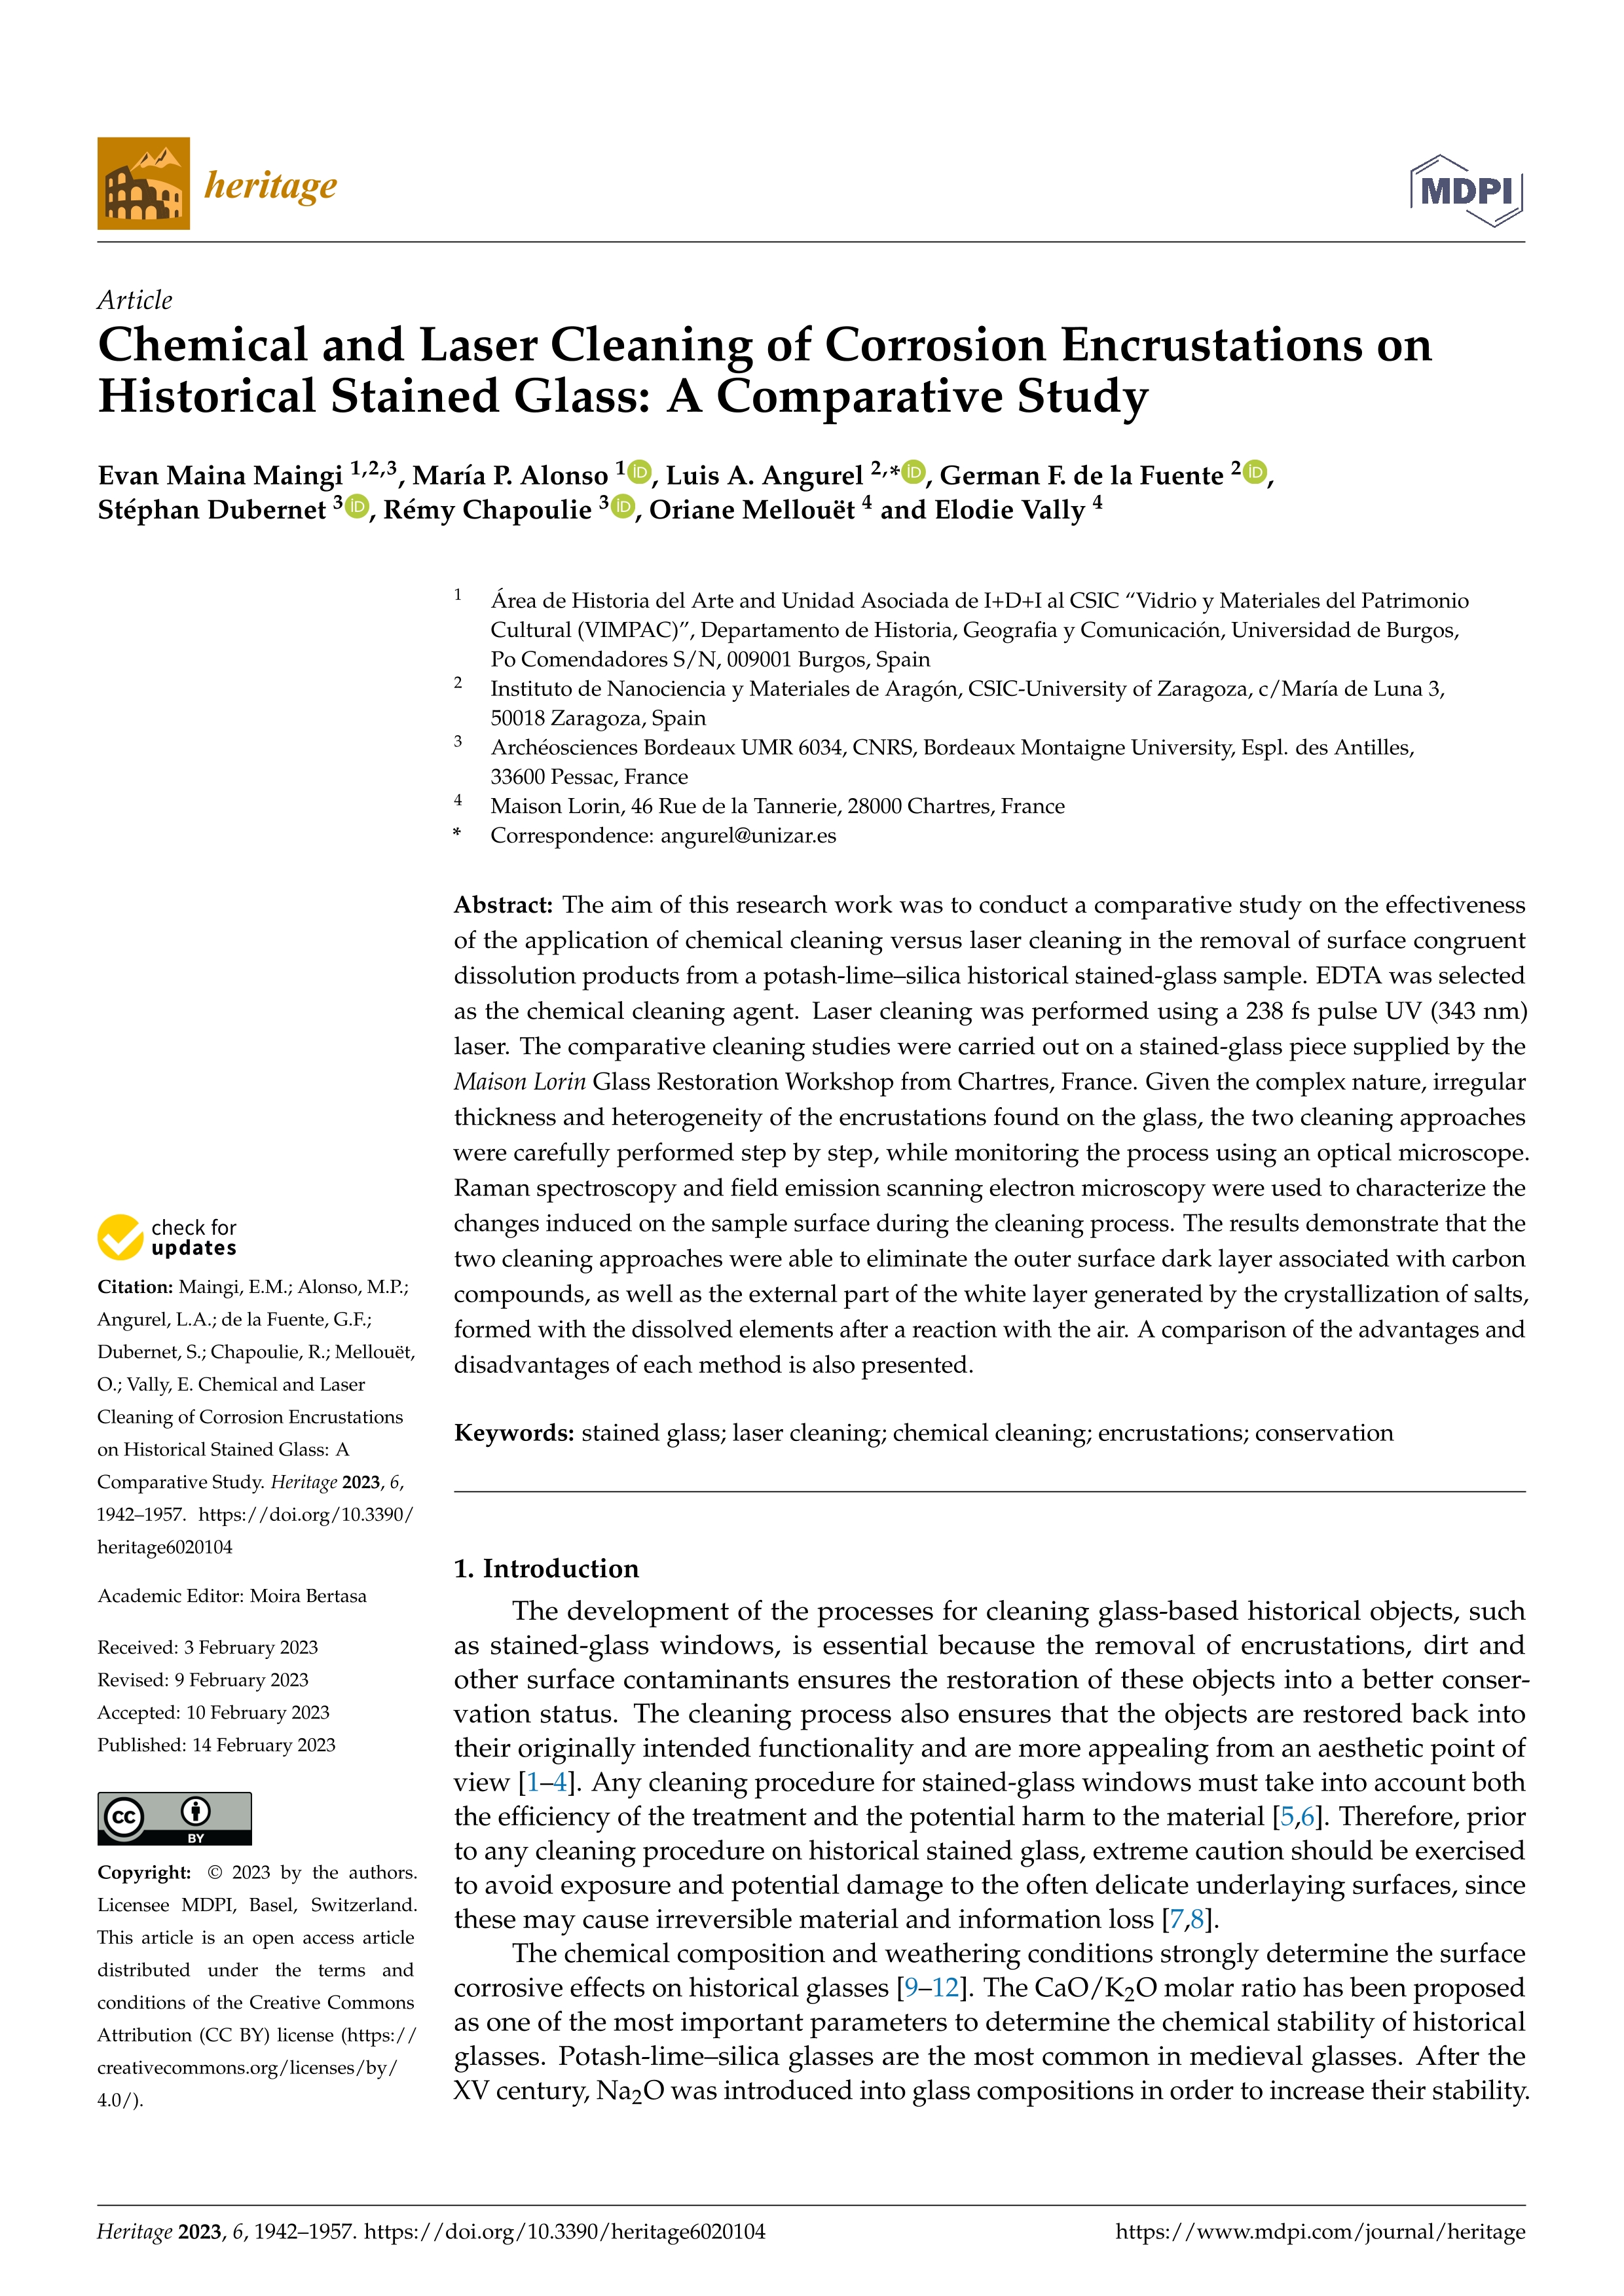 Chemical and laser cleaning of corrosion encrustations on historical stained glass: a comparative study